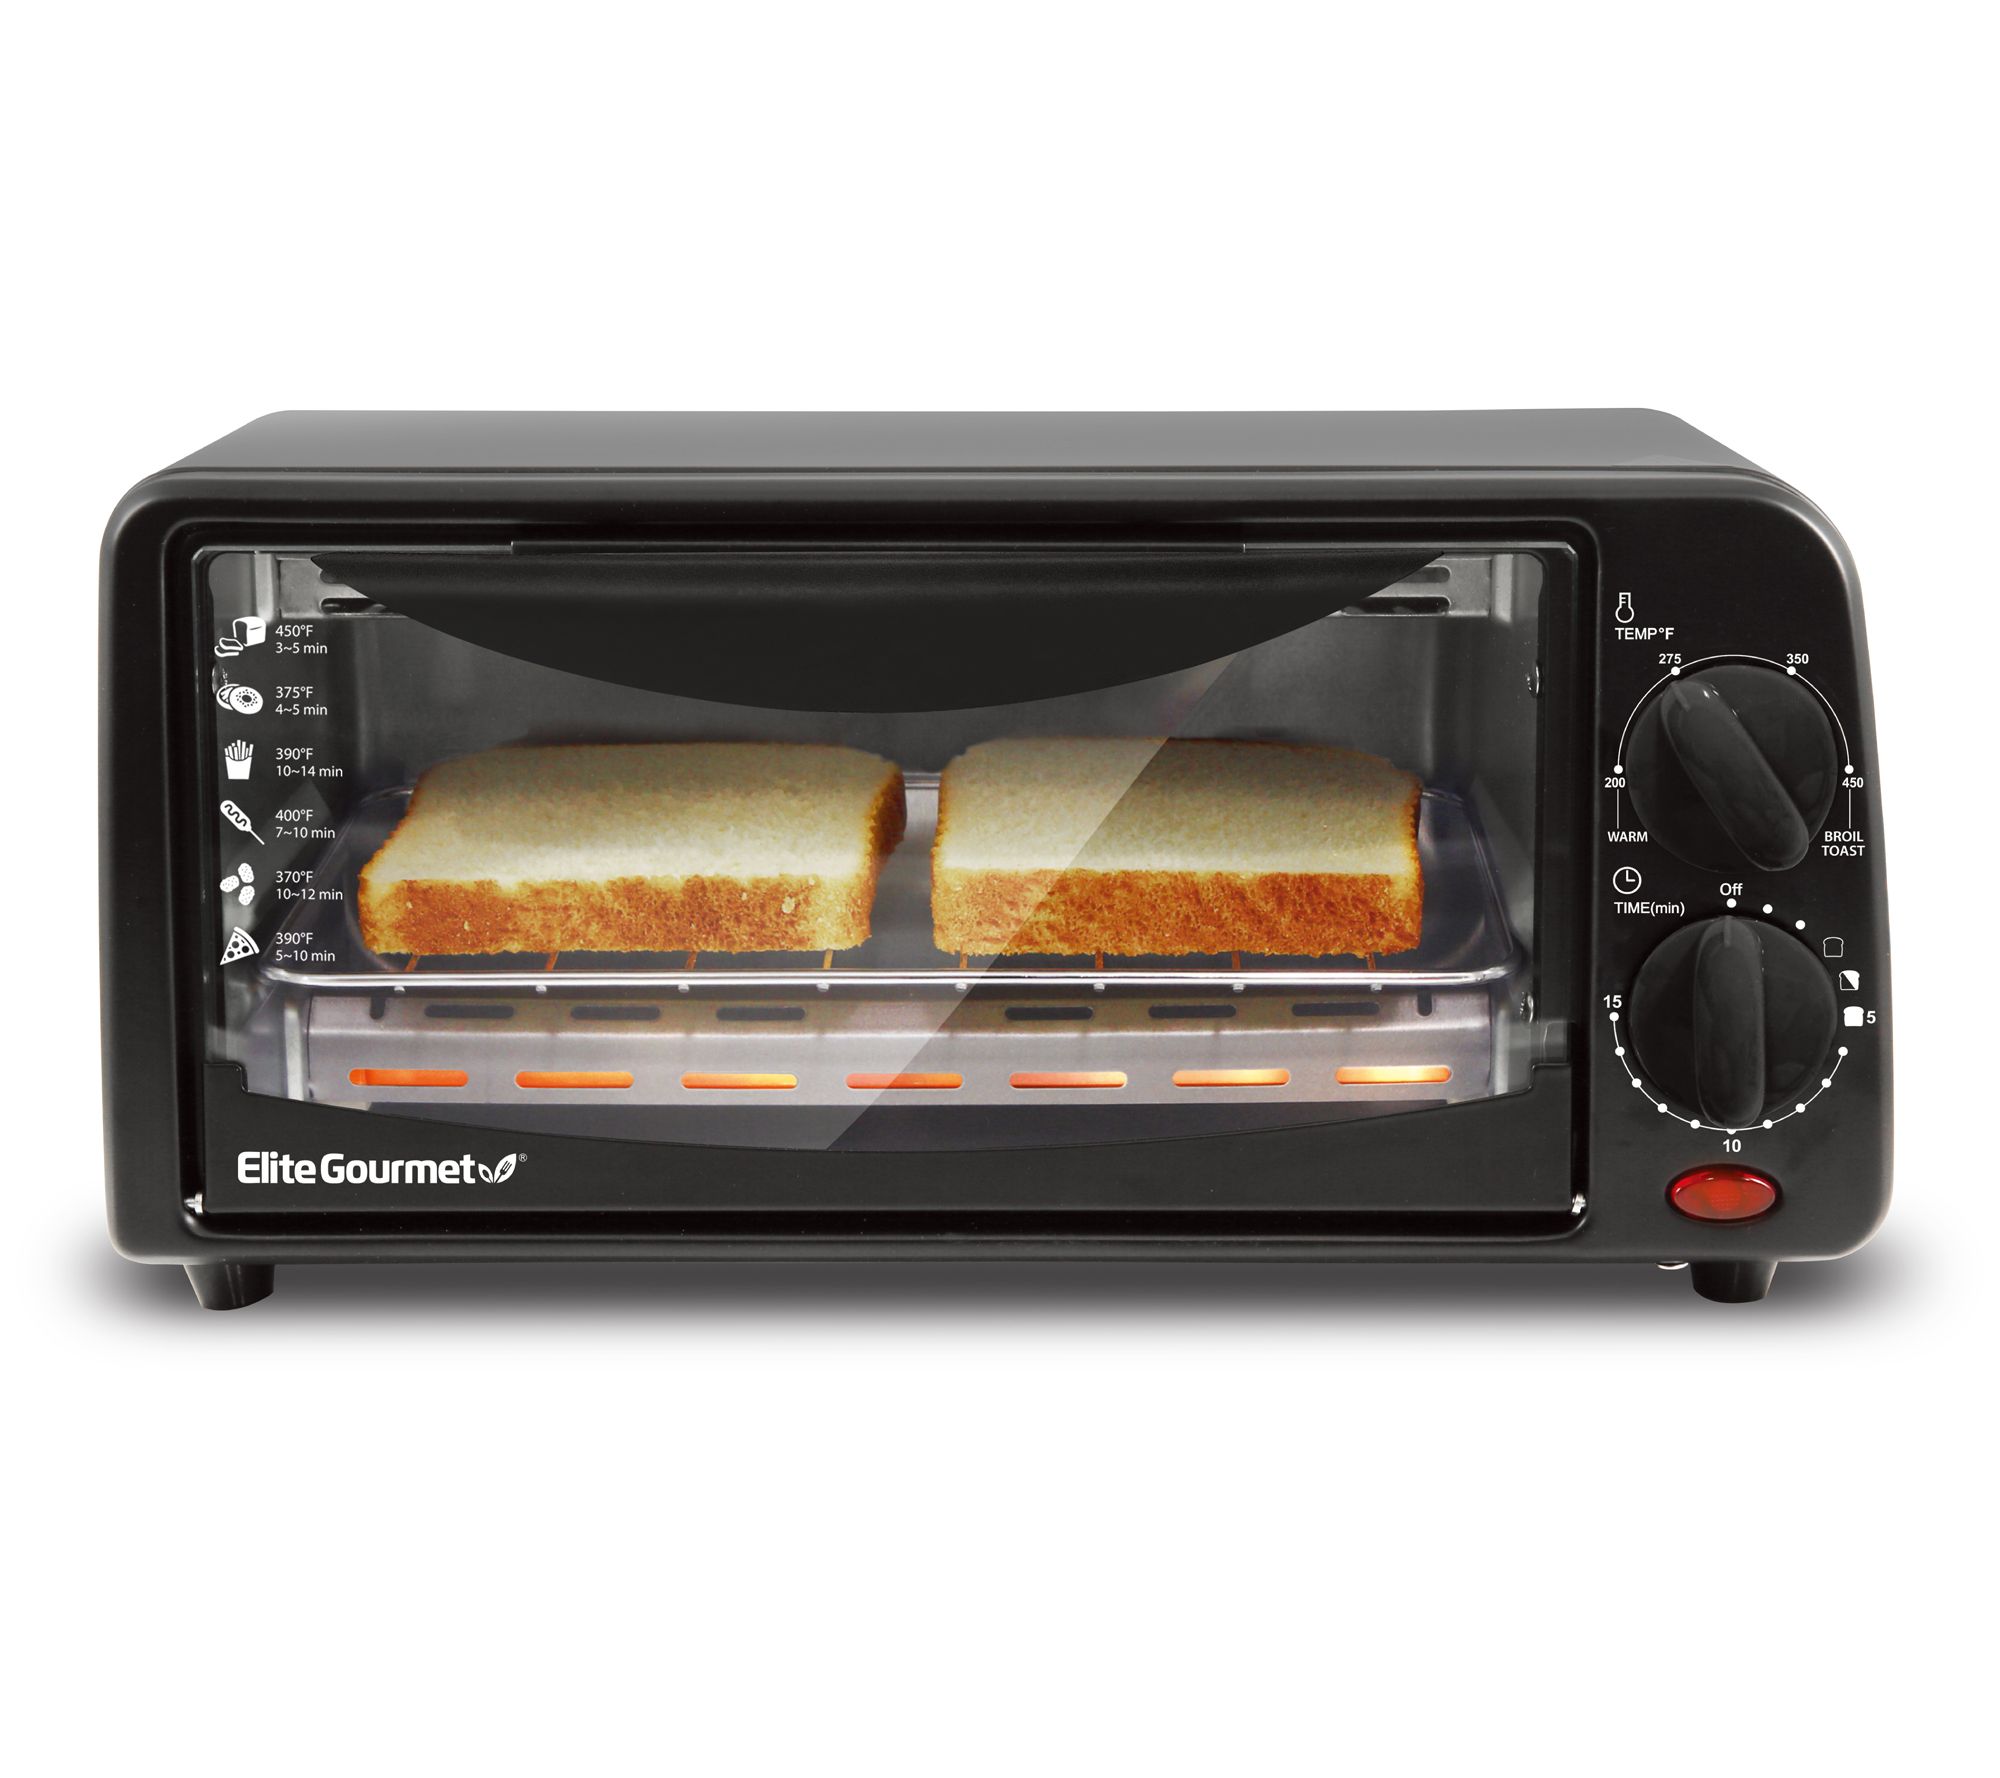 8-Slice Stainless Steel Toaster Oven with Broiler for Sale in